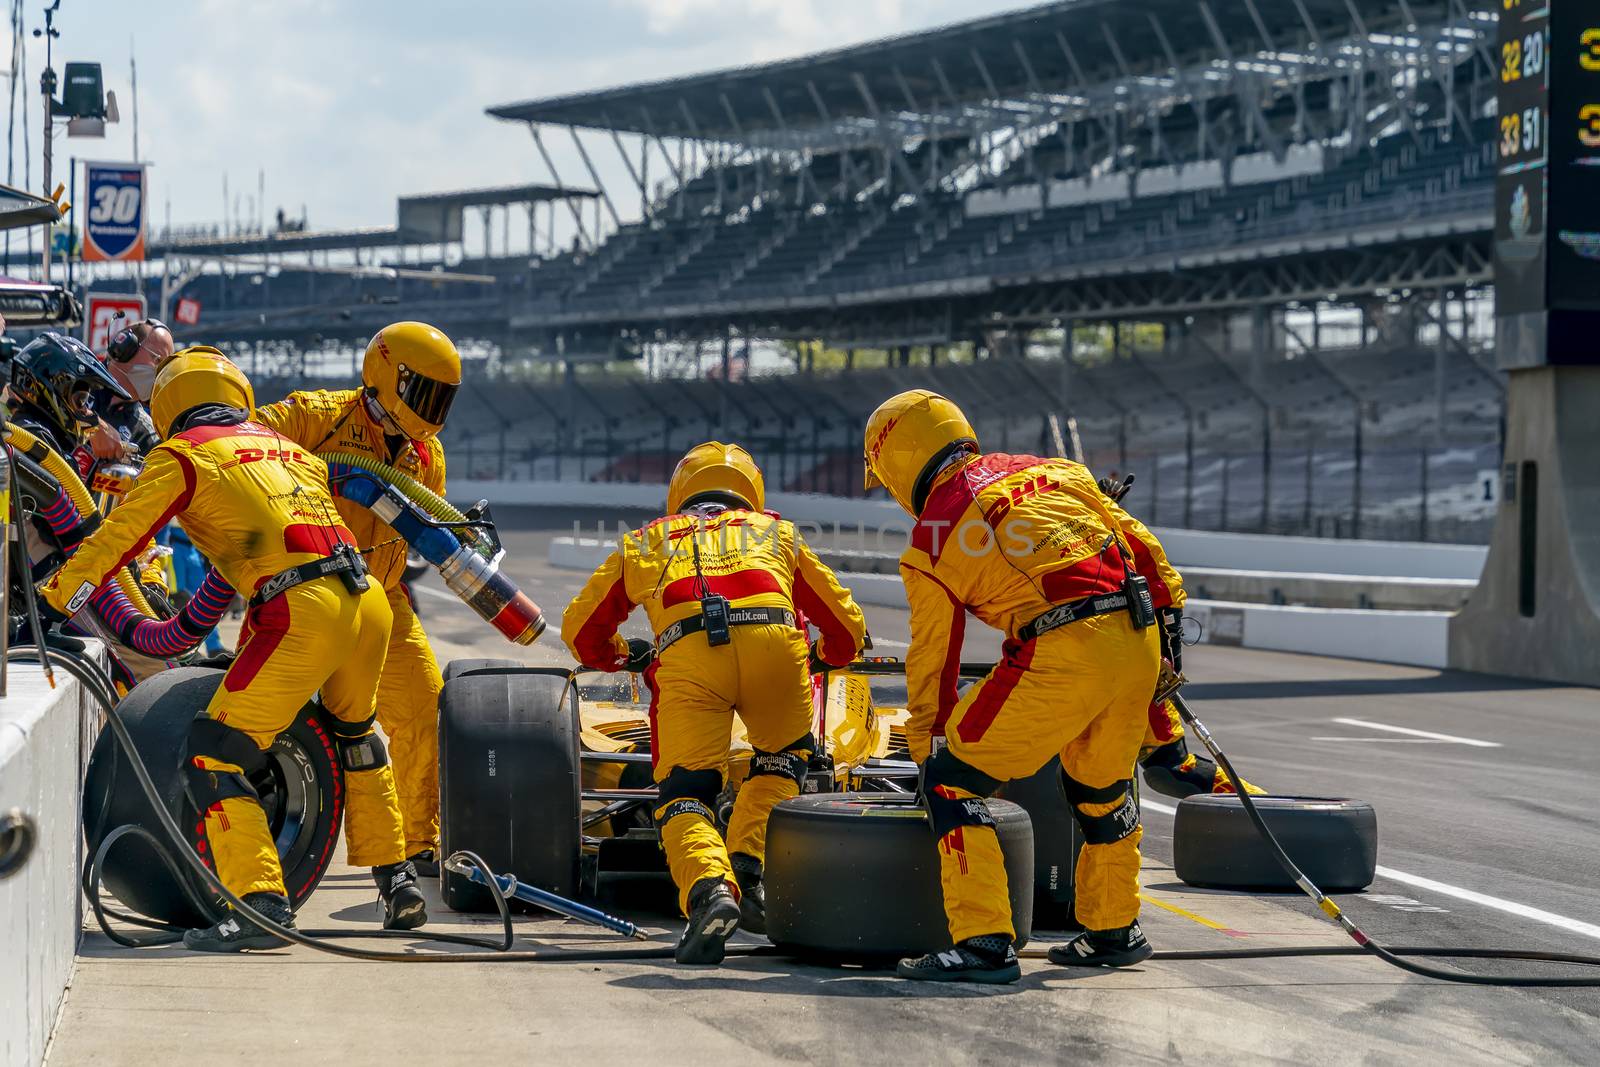 RYAN HUNTER-REAY (28) of the United States brings his car in for service during the Indianapolis 500 at Indianapolis Motor Speedway in Indianapolis Indiana.